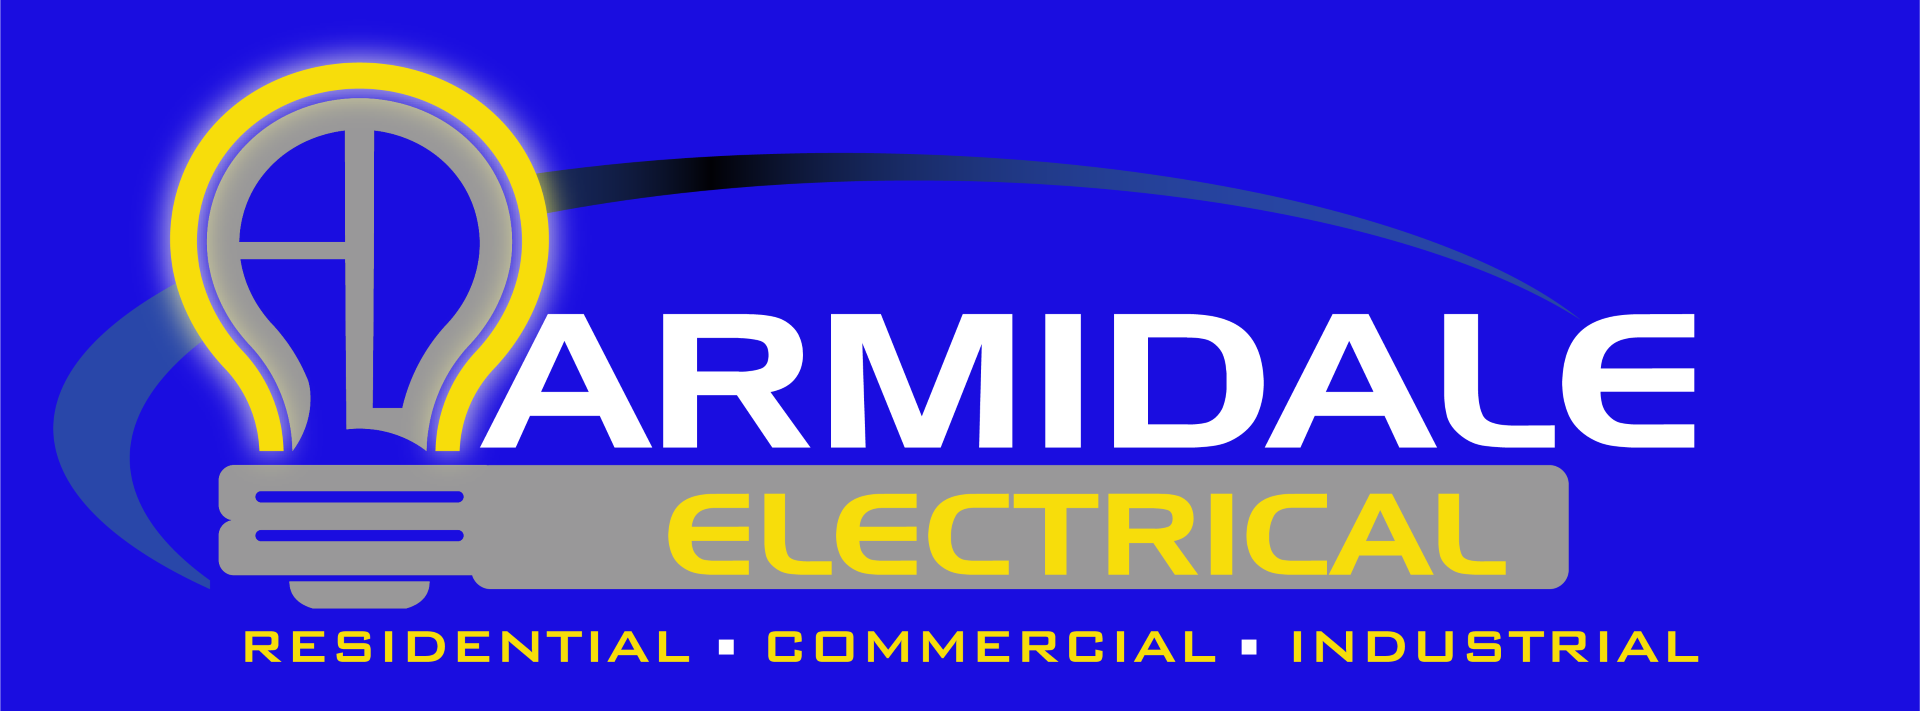 Welcome To Armidale Electrical: Local Electrical Contractors